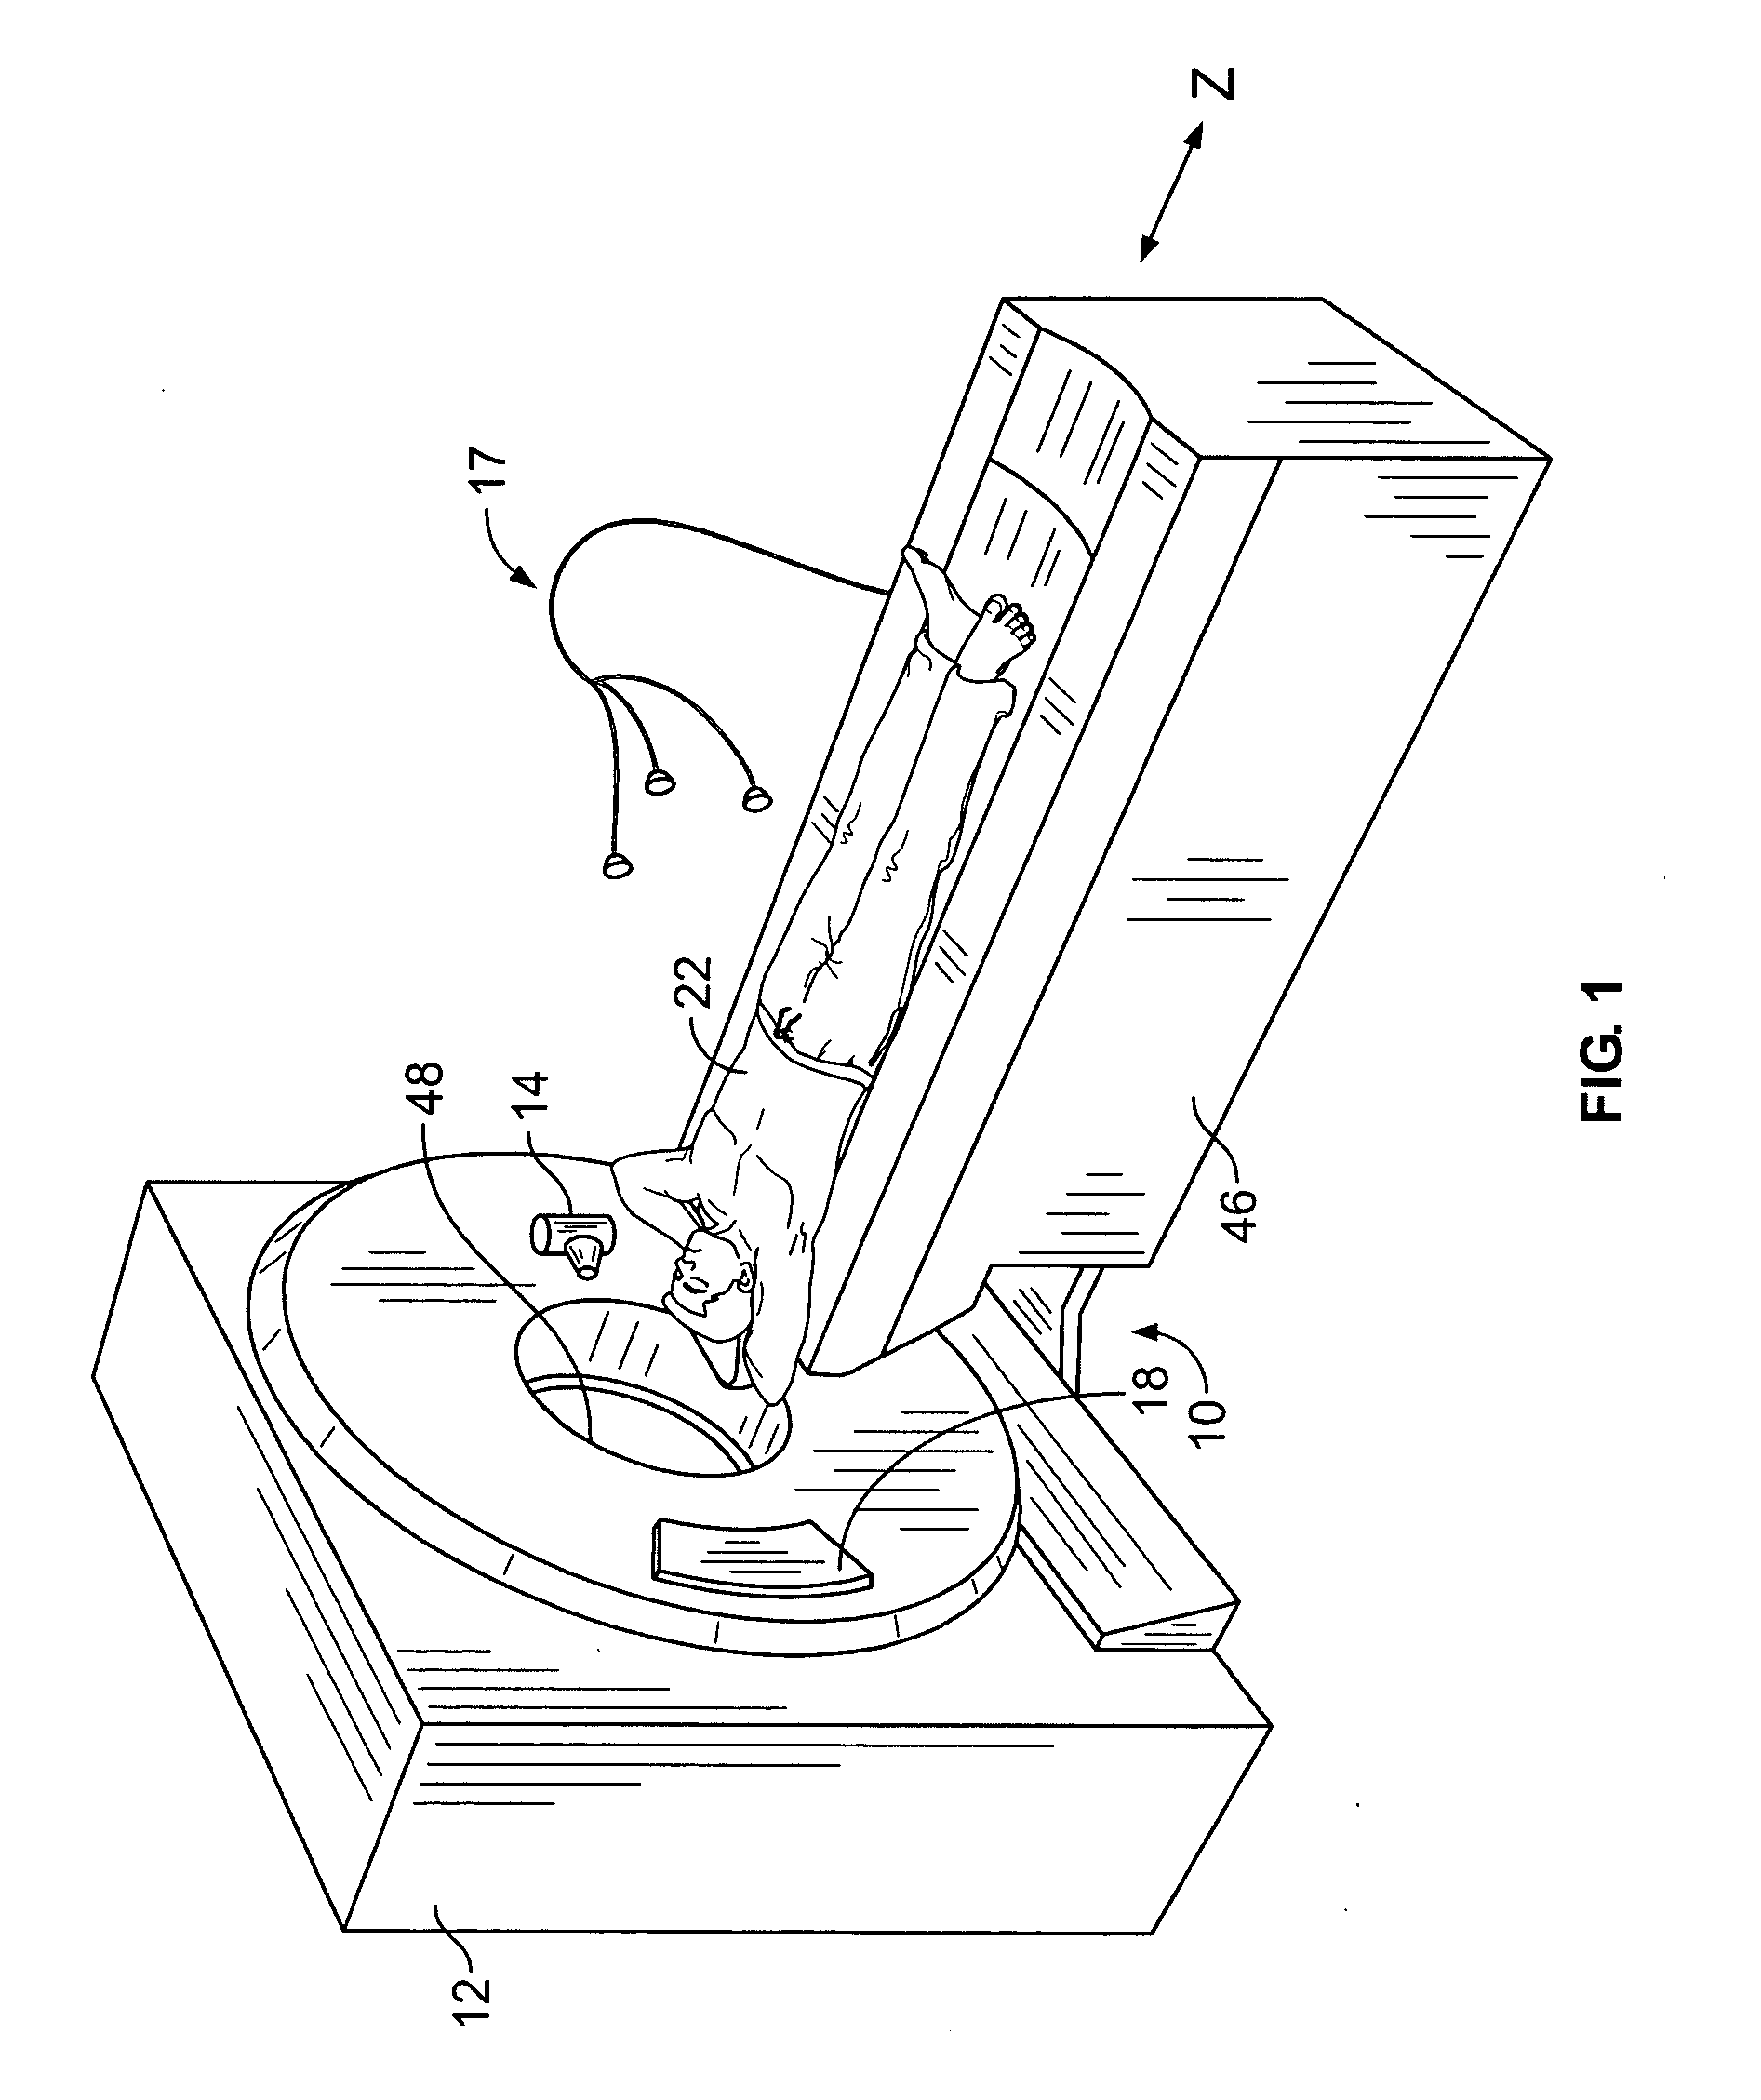 Method and system for performing CT image reconstruction with motion artifact correction